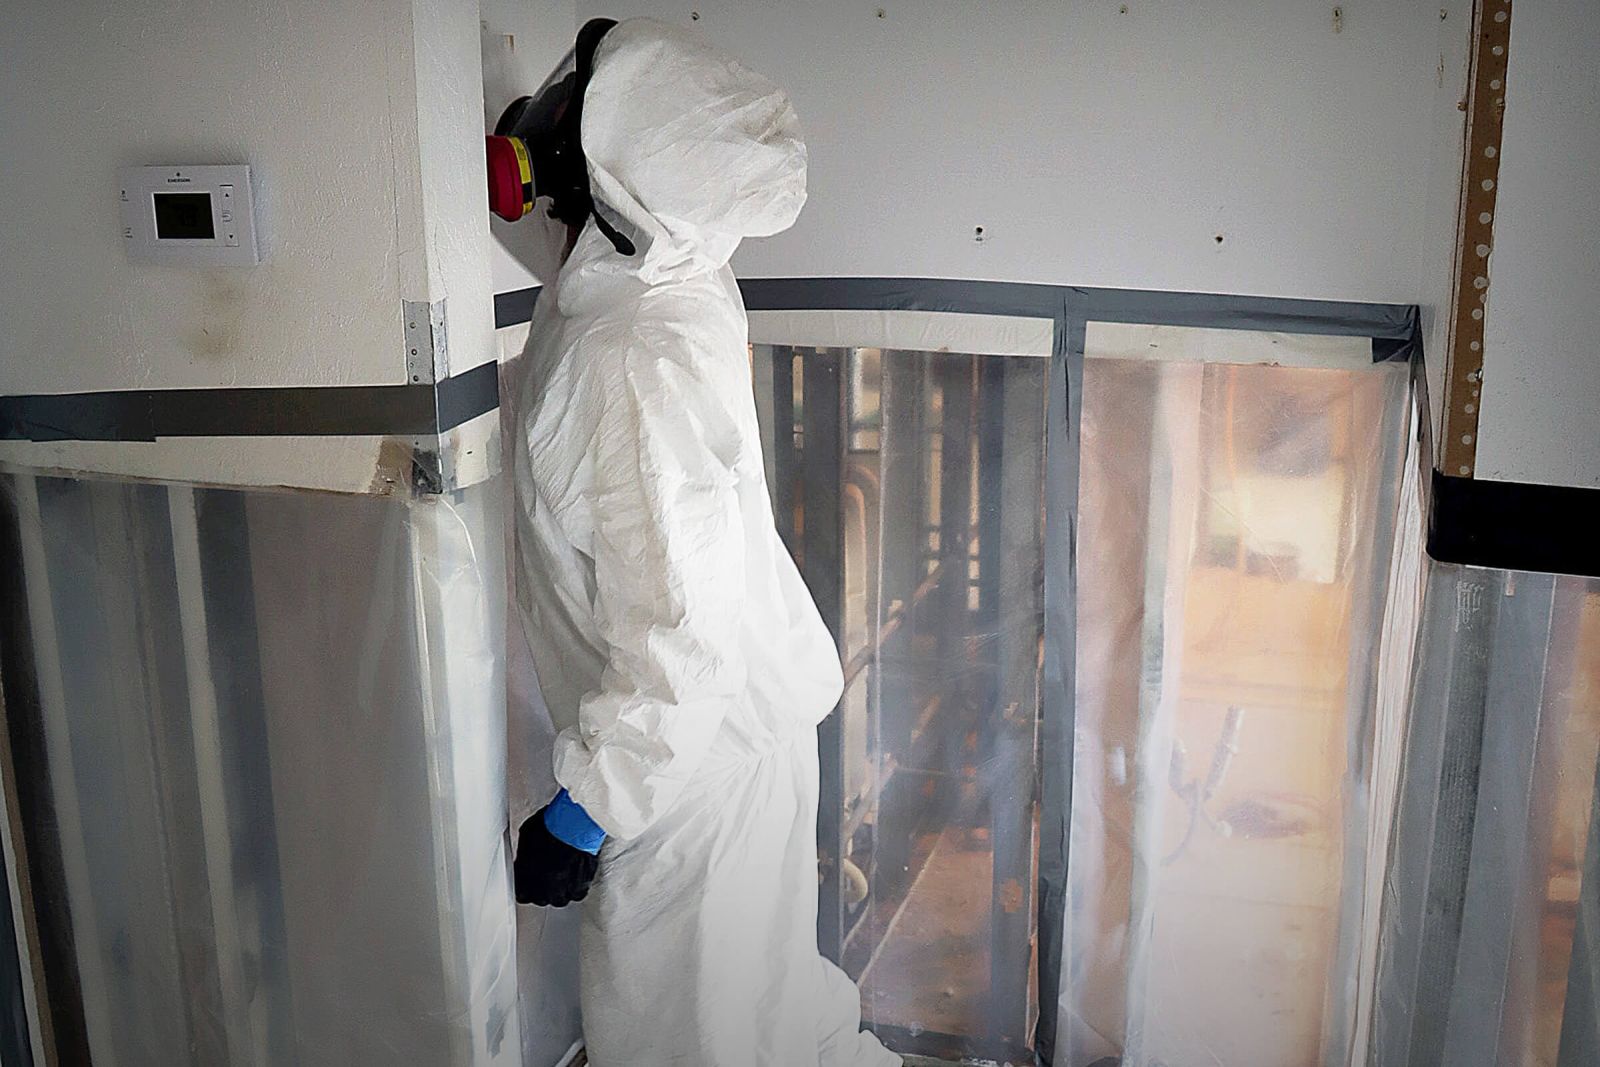 Pur360 Technician in a hazmat suit working on mold remediation